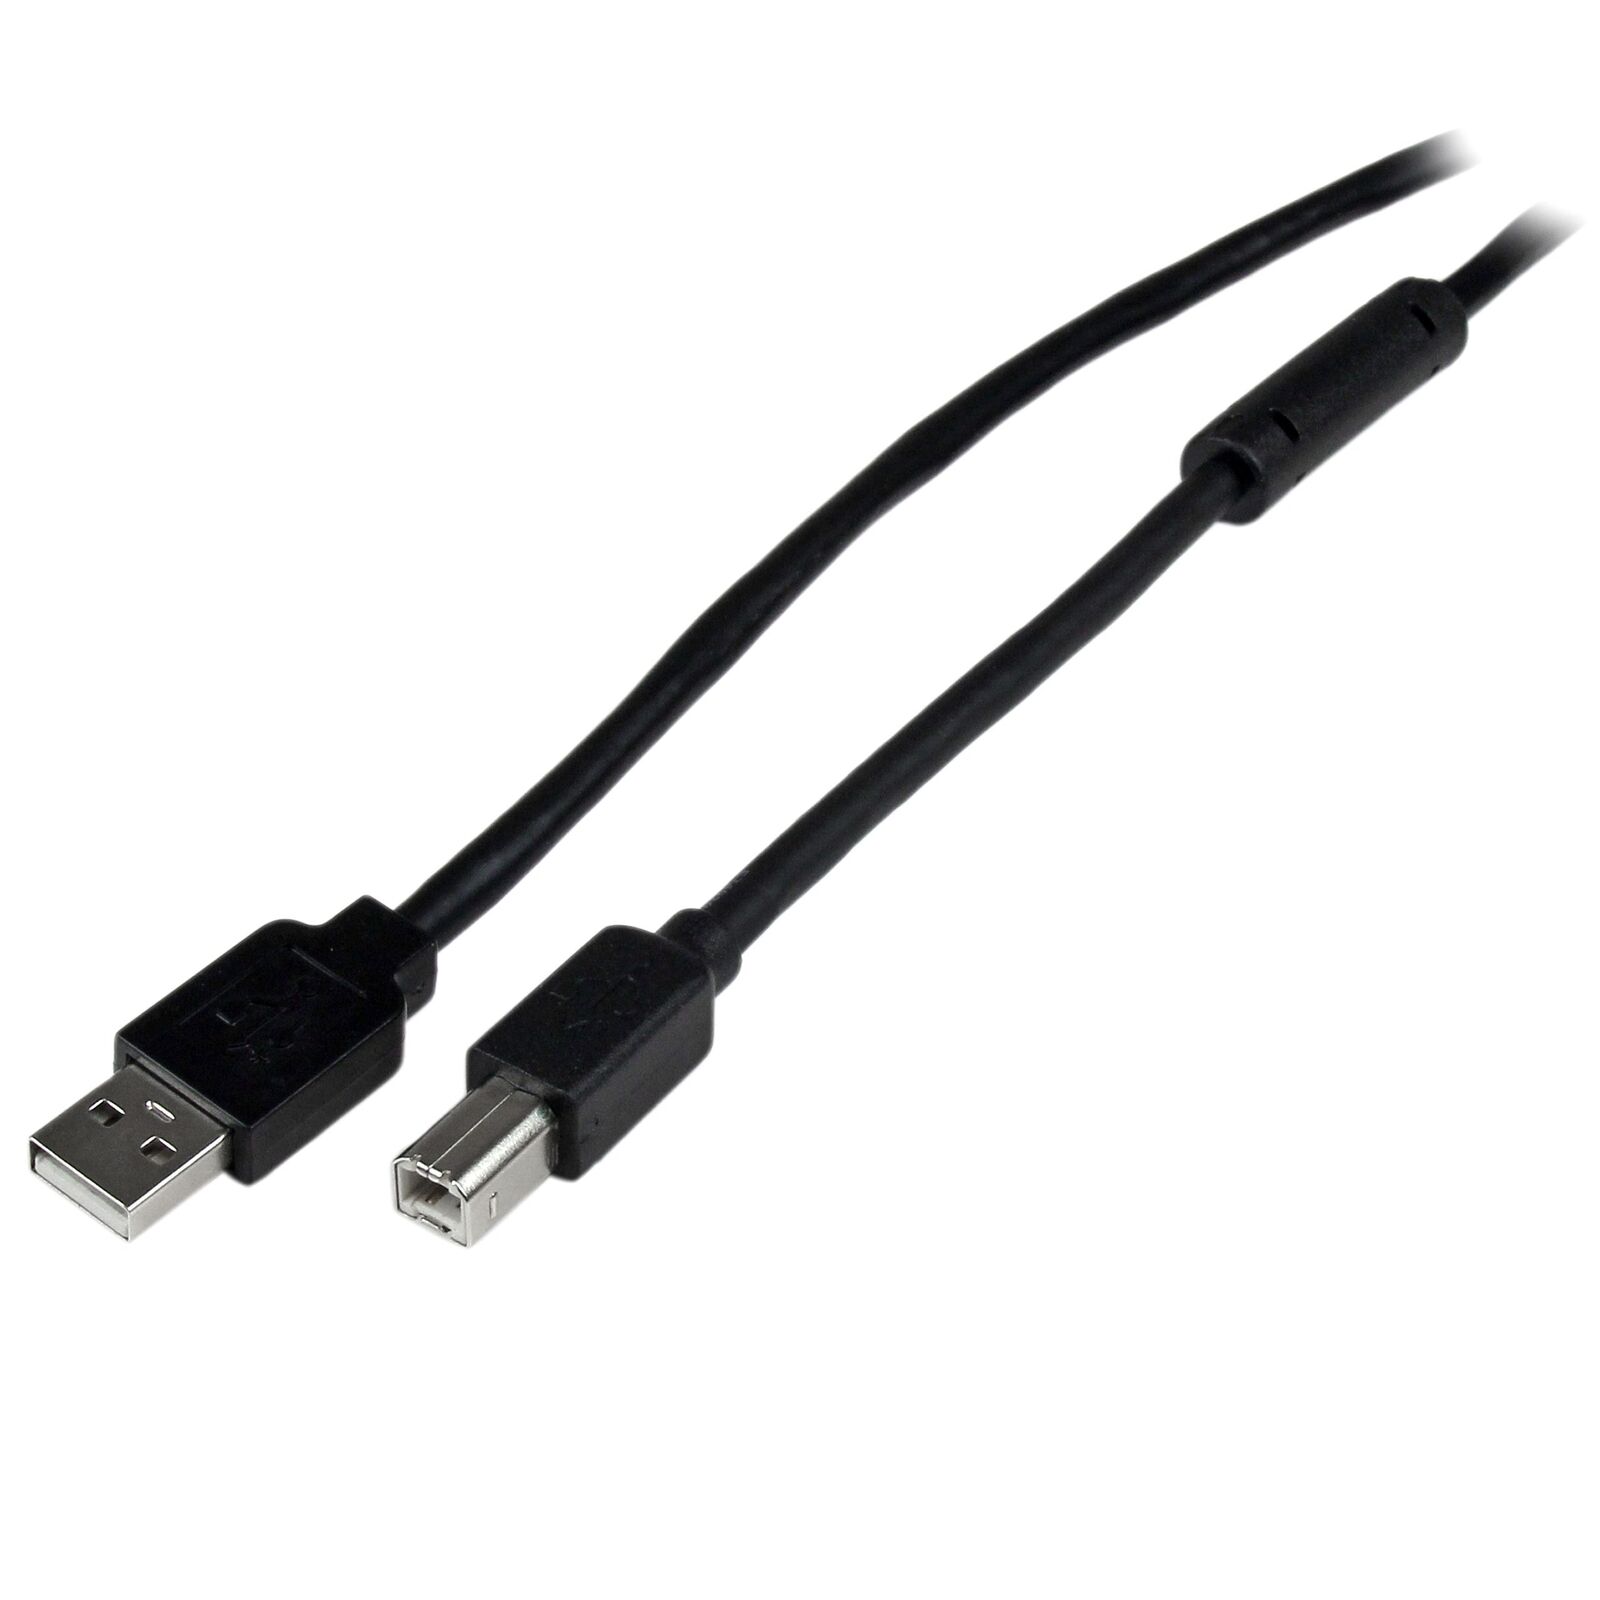 StarTech.com 20m / 65 ft Active USB 2.0 A to B Cable - Long 20 m USB Cable - 20m